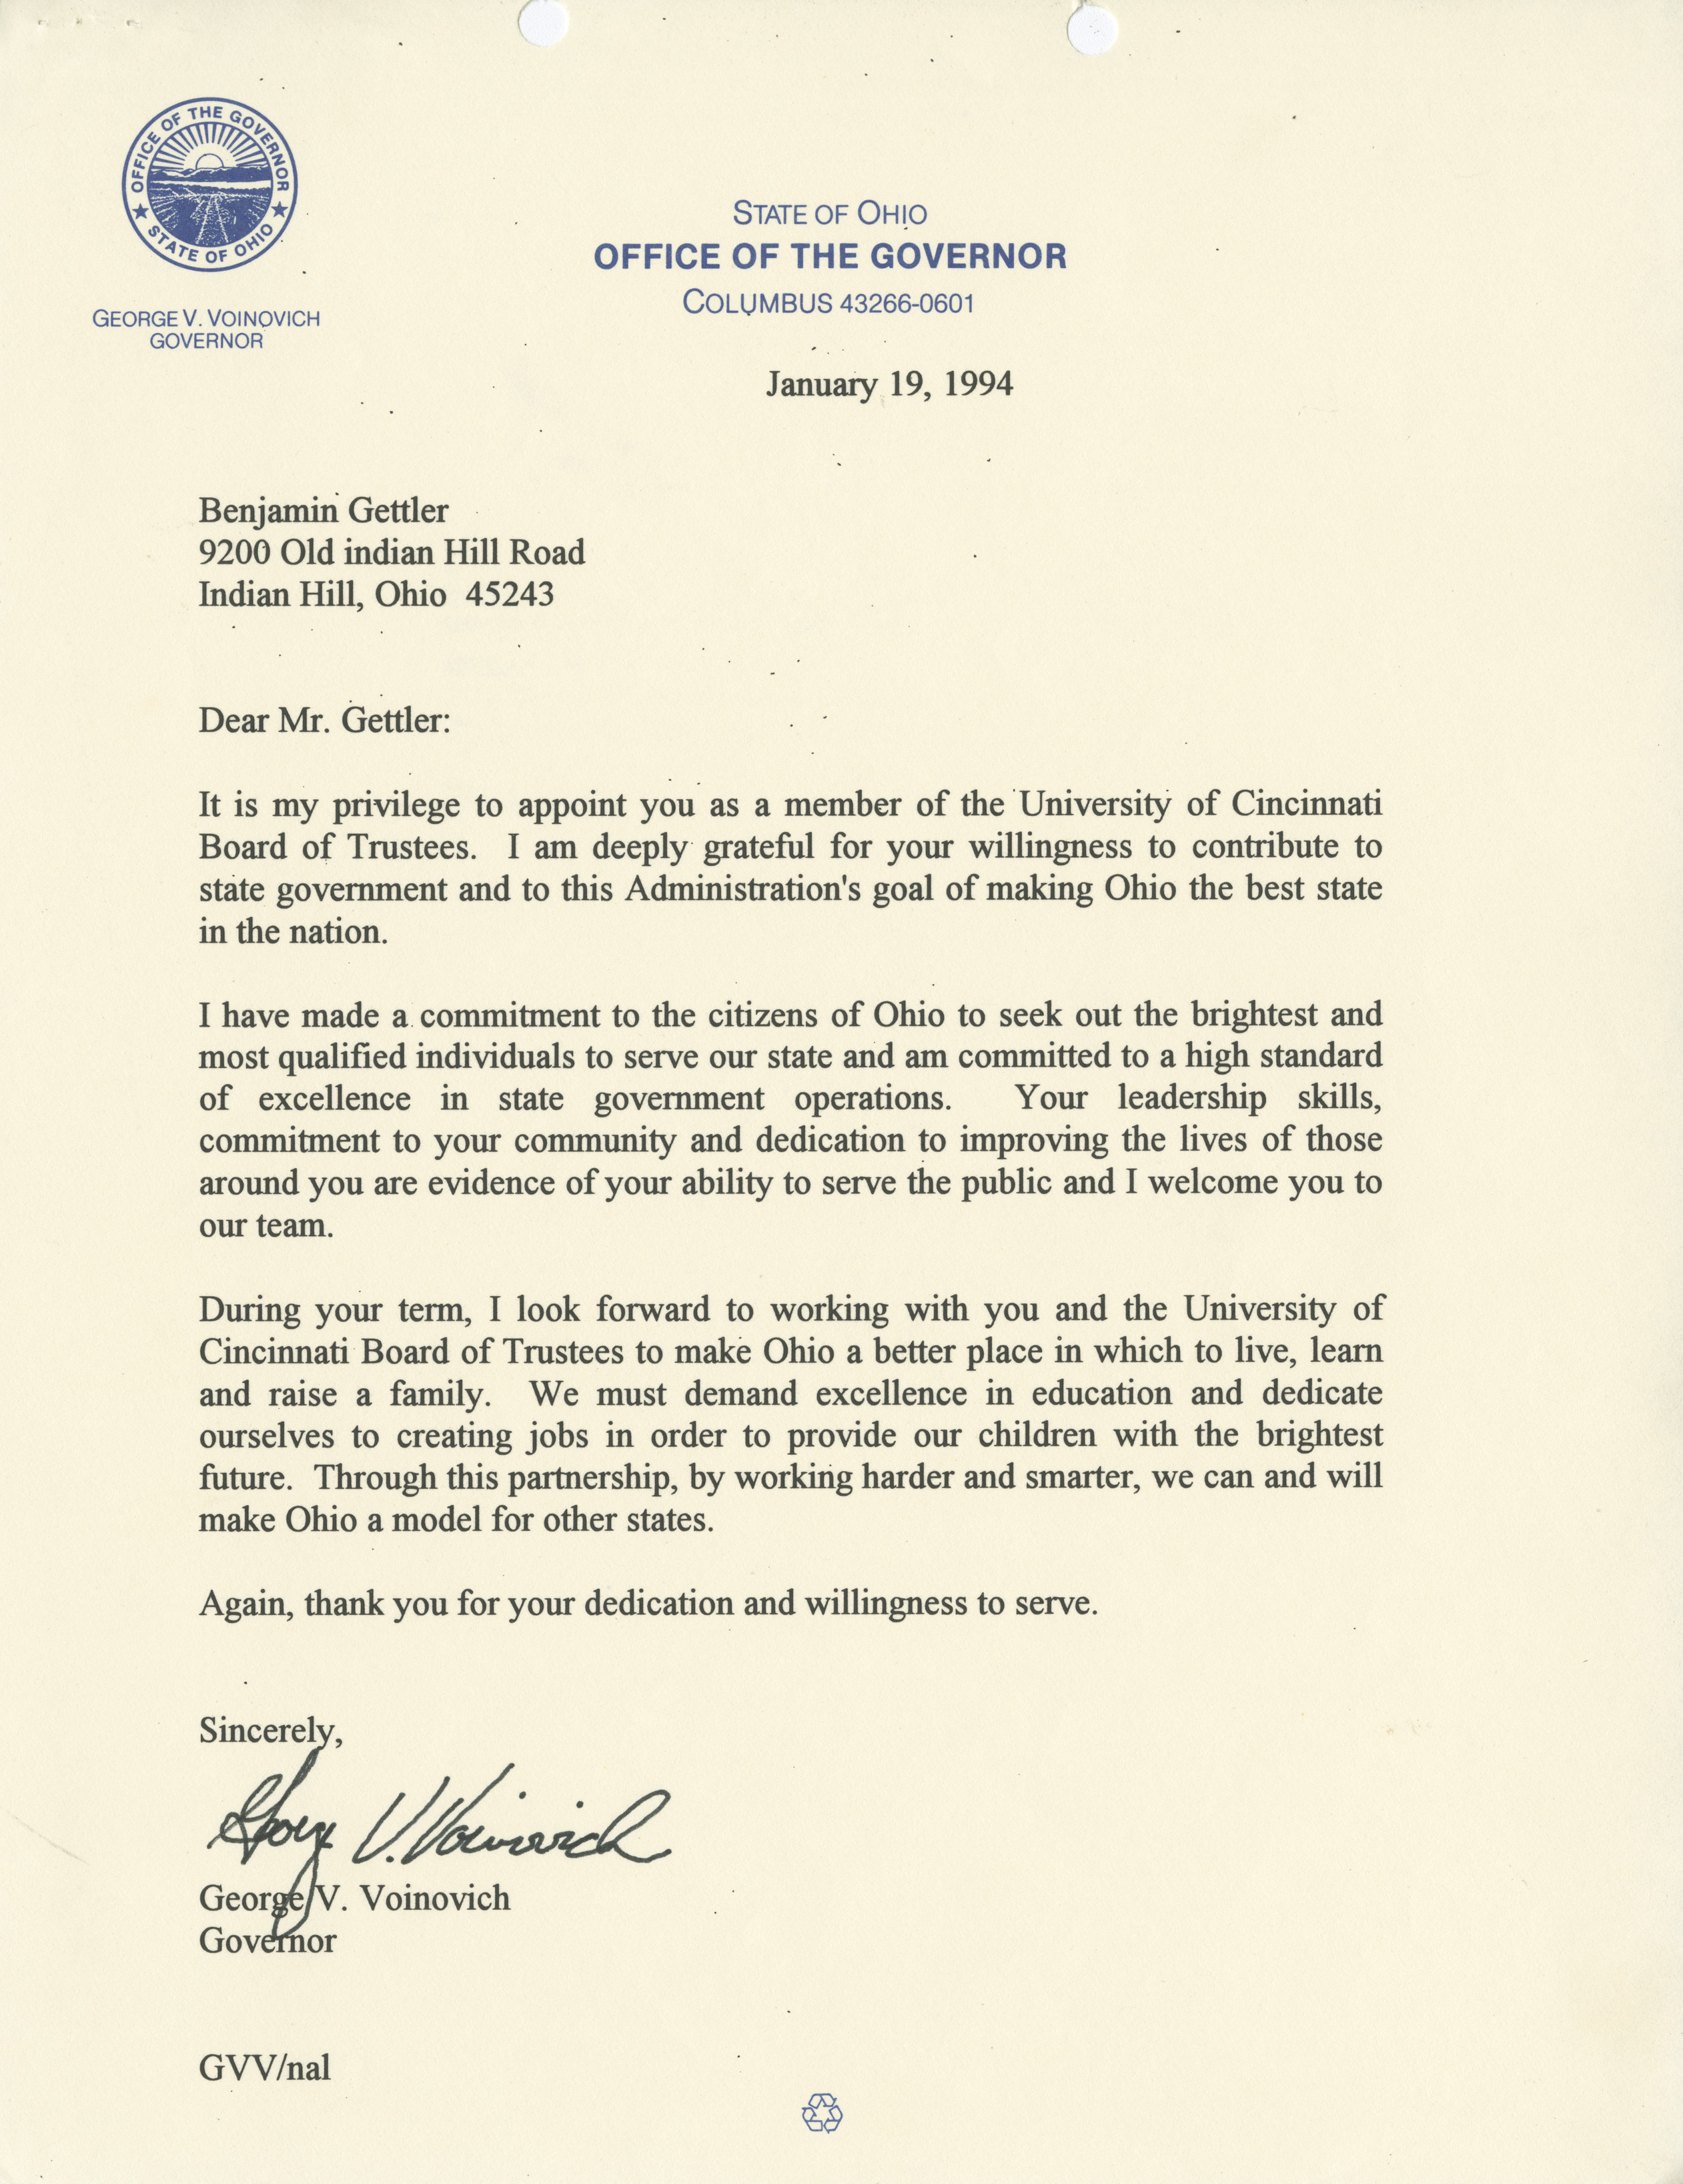 A letter dated January 19, 1994 from Governor George Voinovich naming Benjamin Gettler to the UC Board of Trustees.